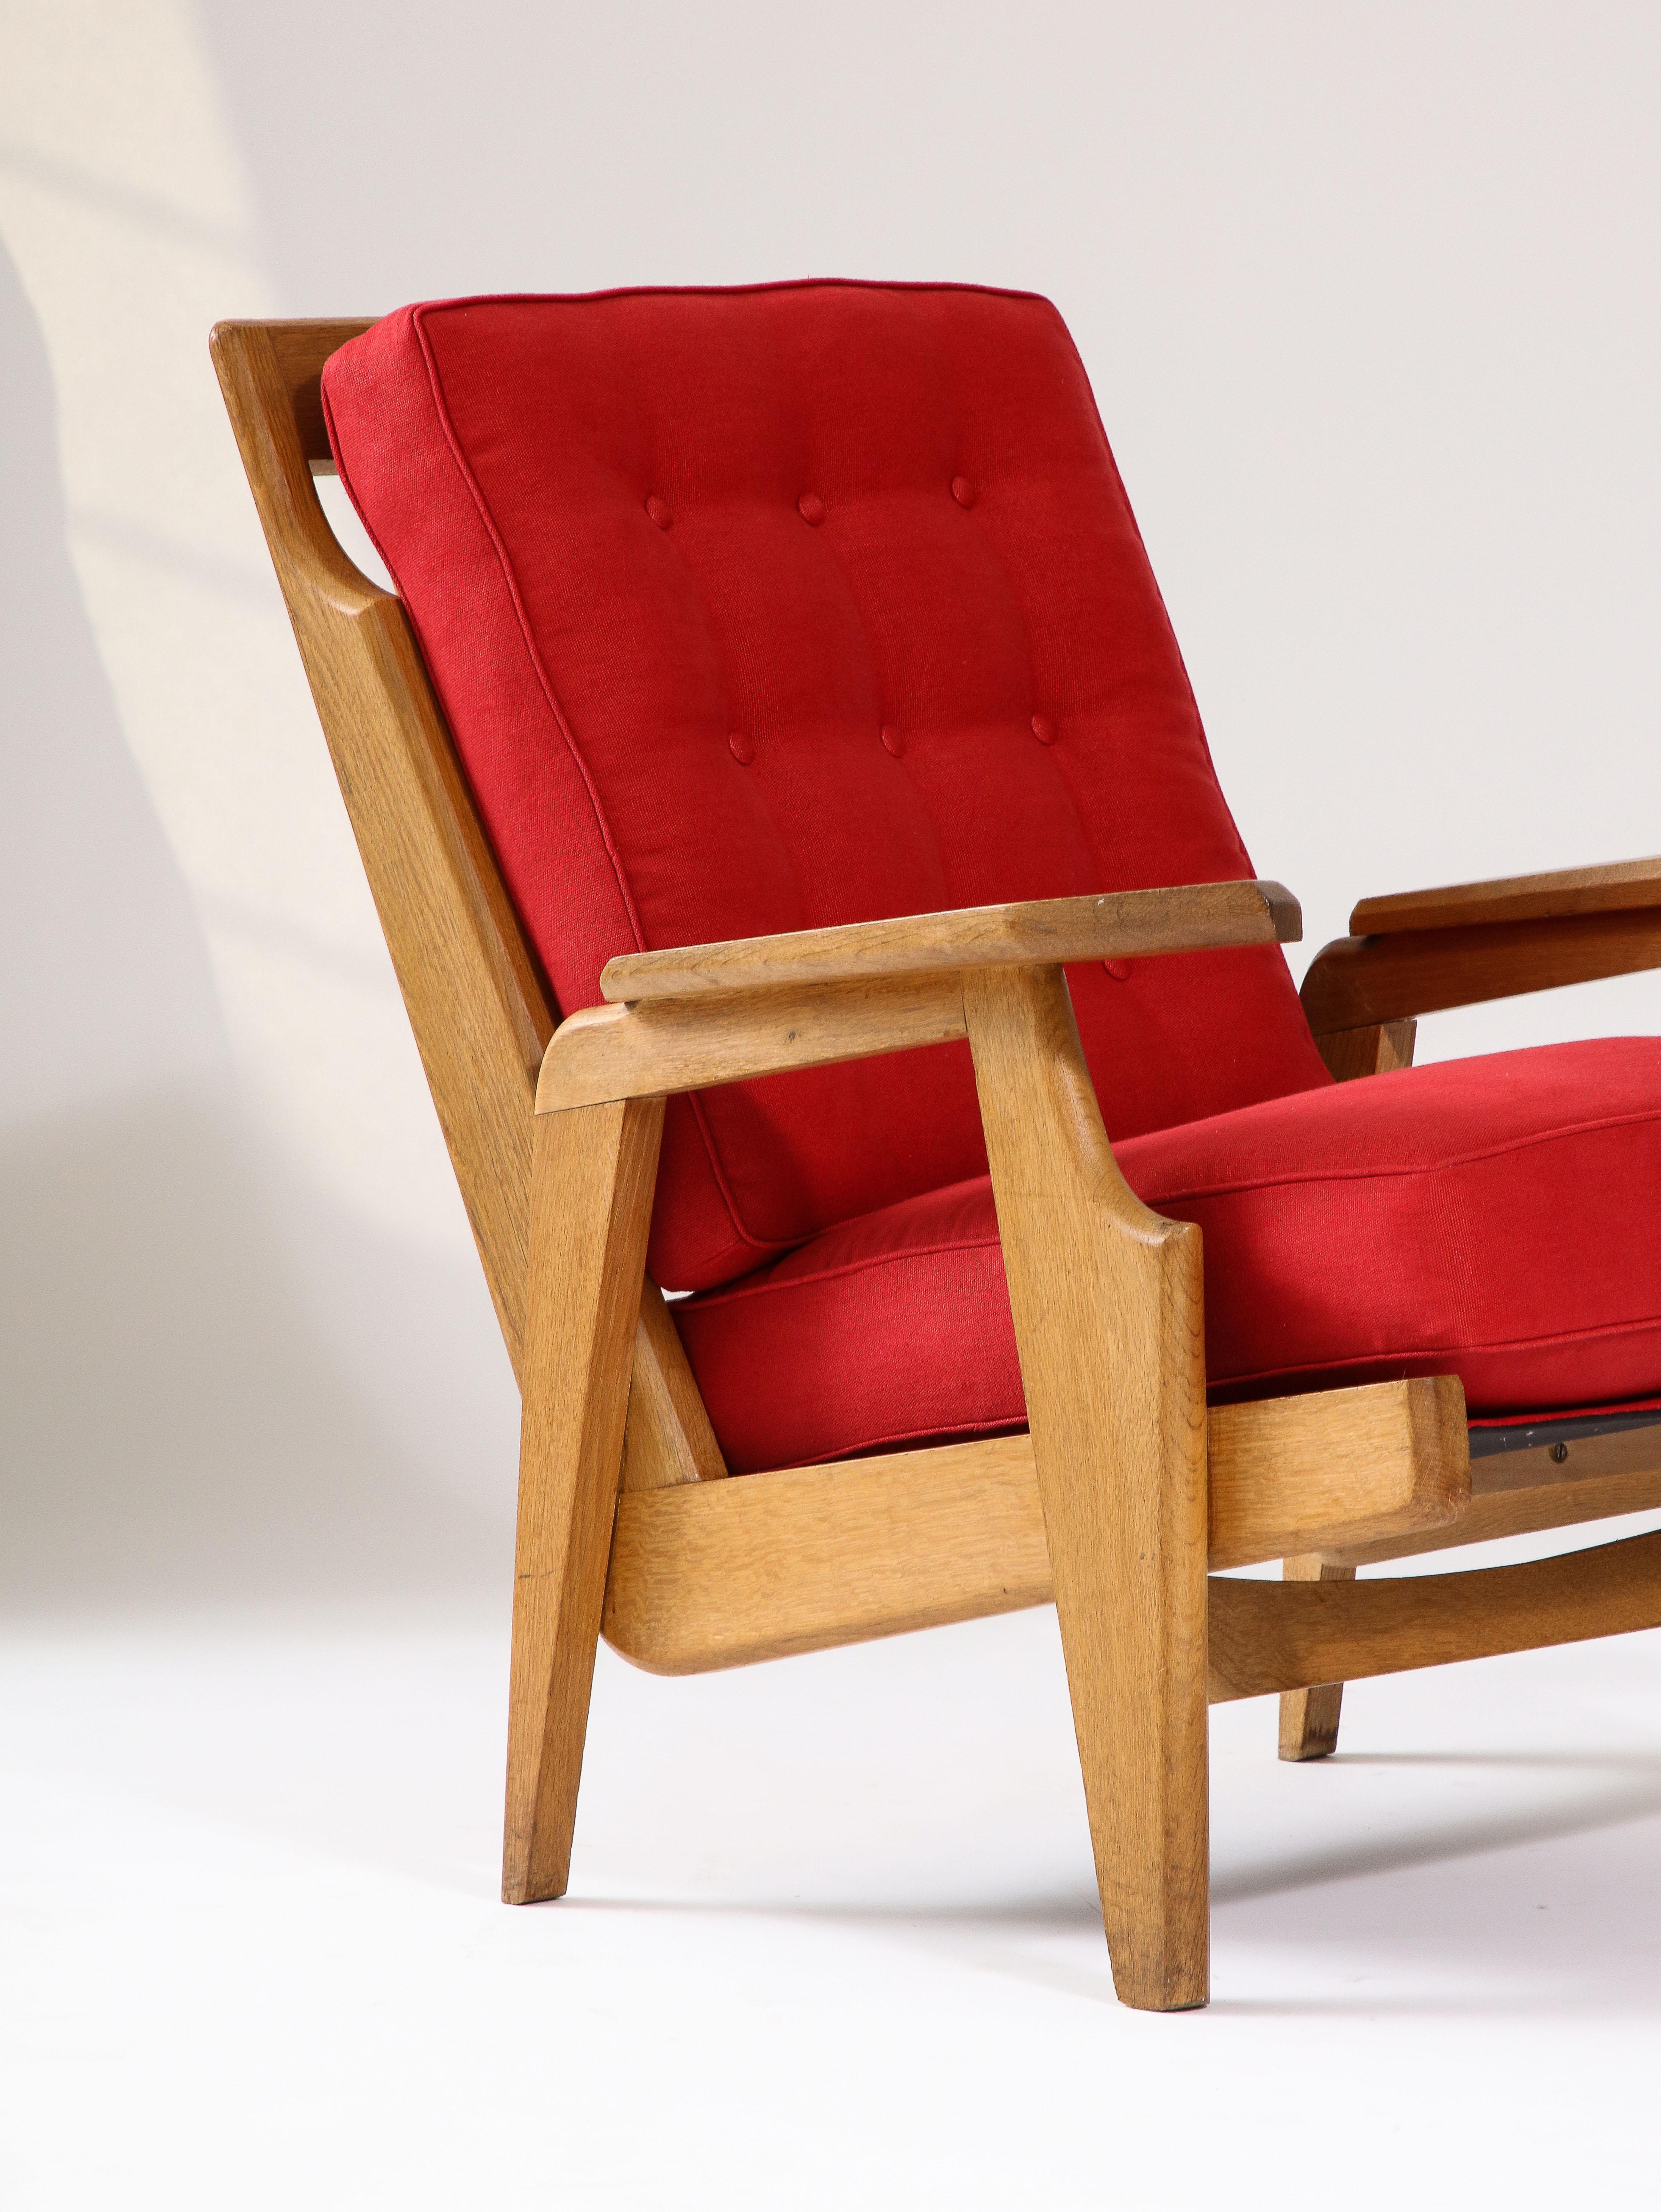 Mid-Century Modern Oak and Upholstery Armchair by Guillerme et Chambron, France, c. 1960